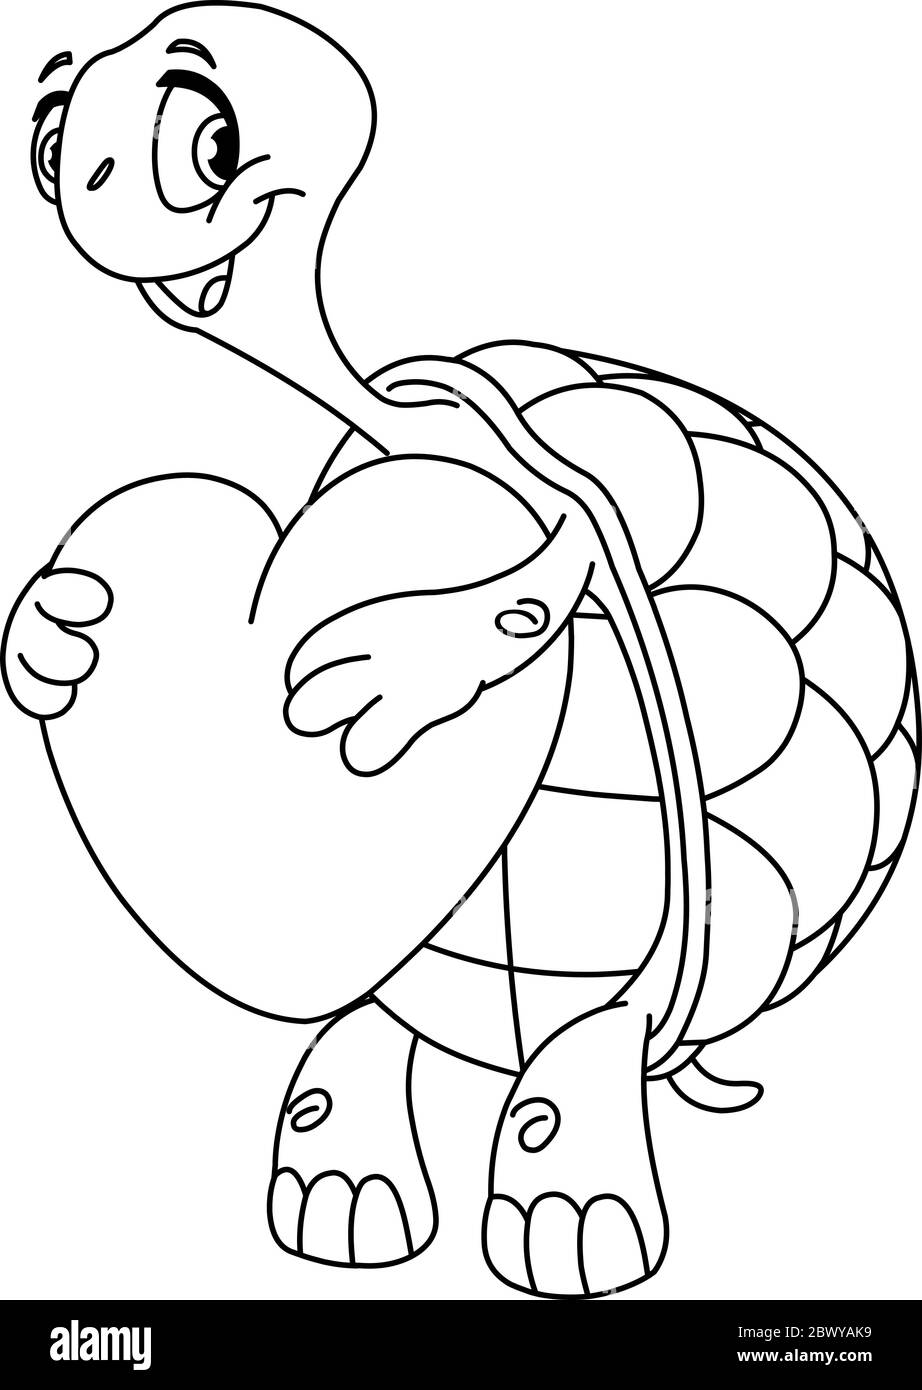 Outlined turtle holding a heart. Vector illustration line art coloring page. Stock Vector